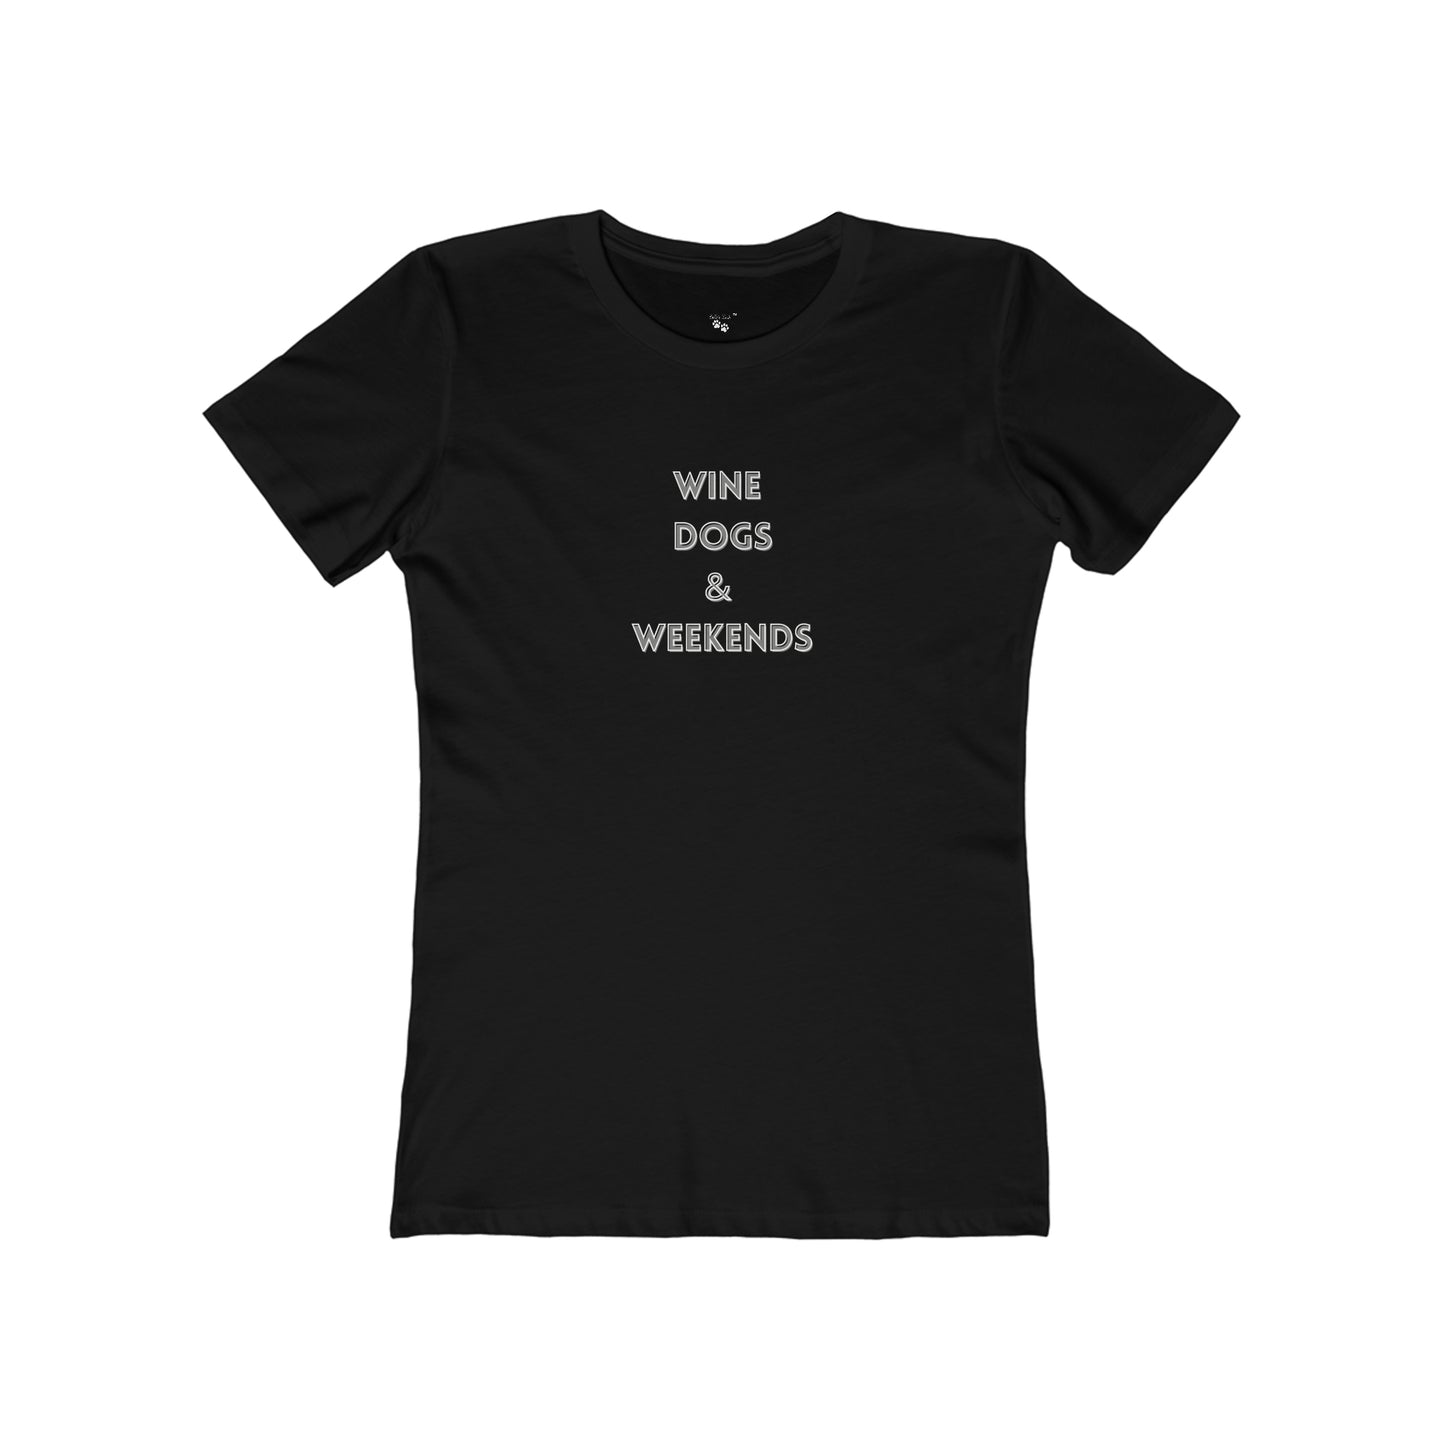 Wine Dogs & Weekends Graphic Tee for Women